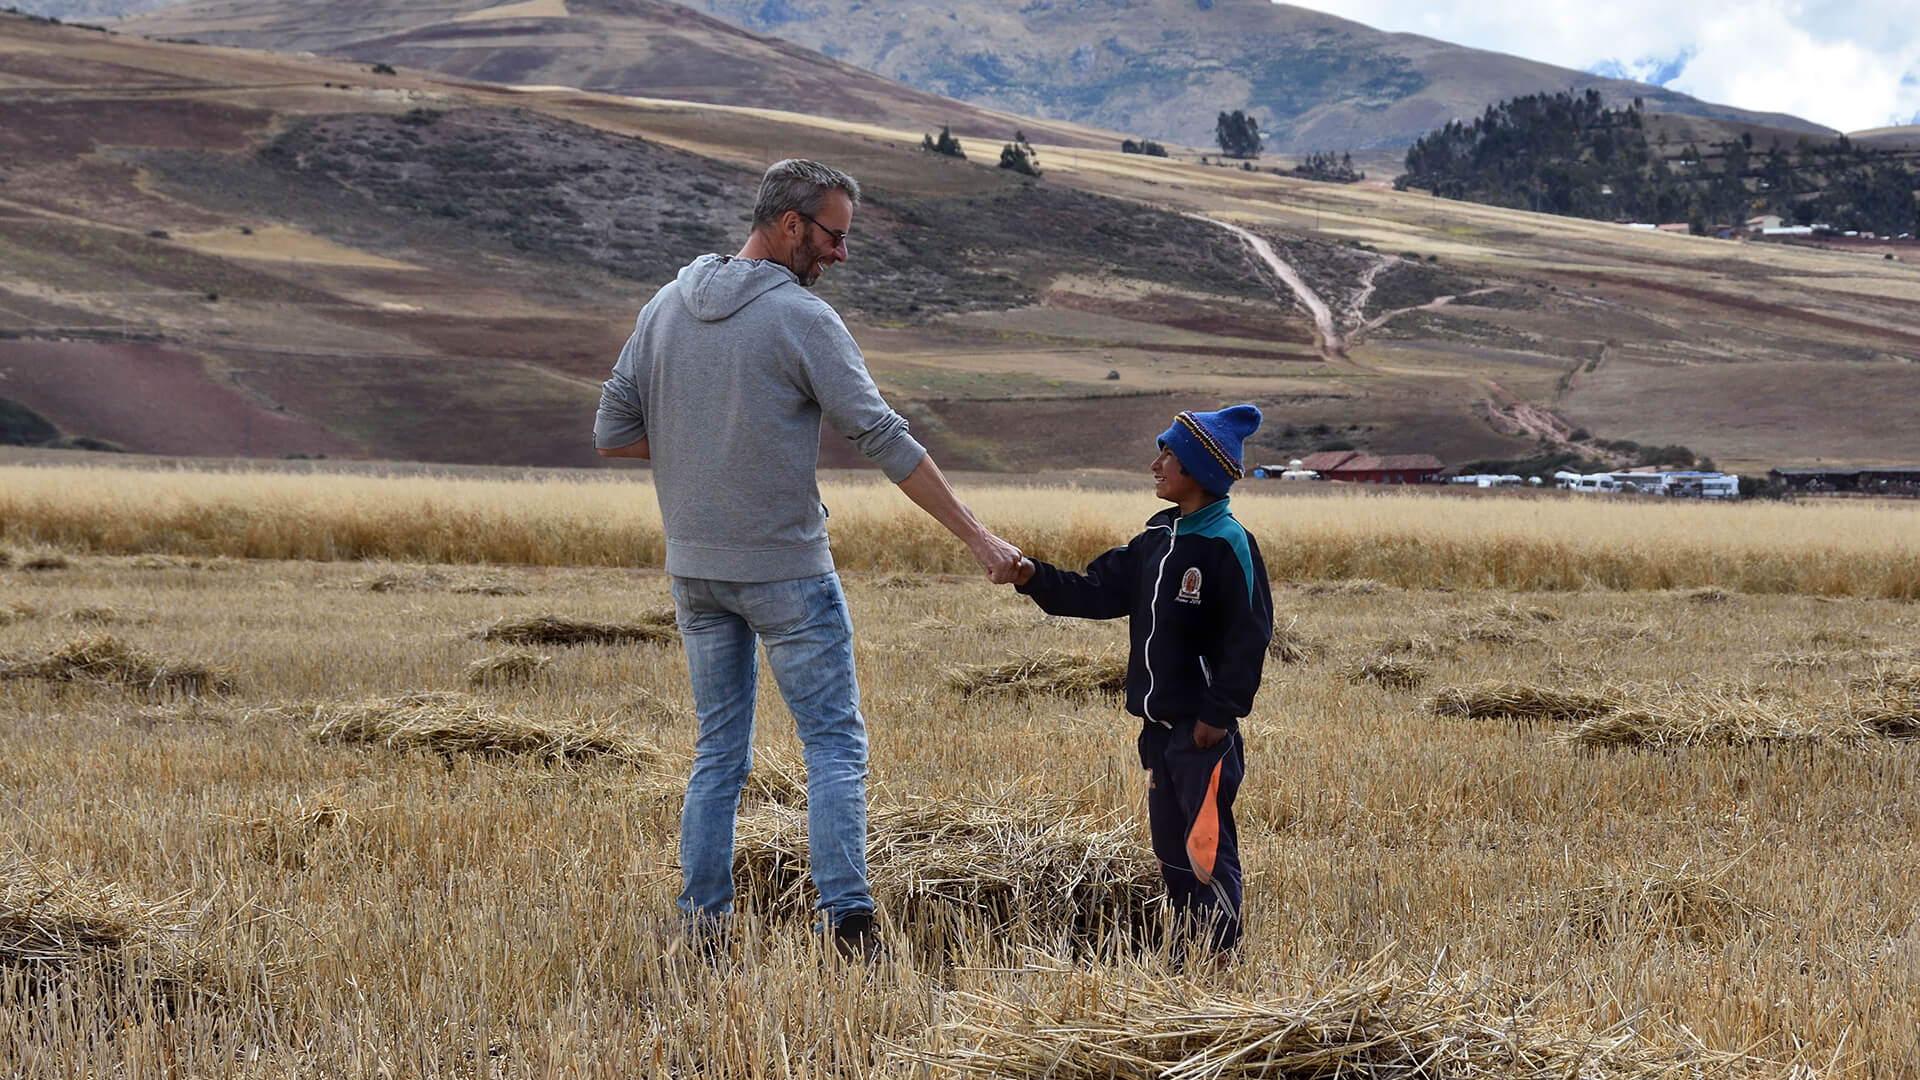 Adult and child shaking hands on Peruvian landscape